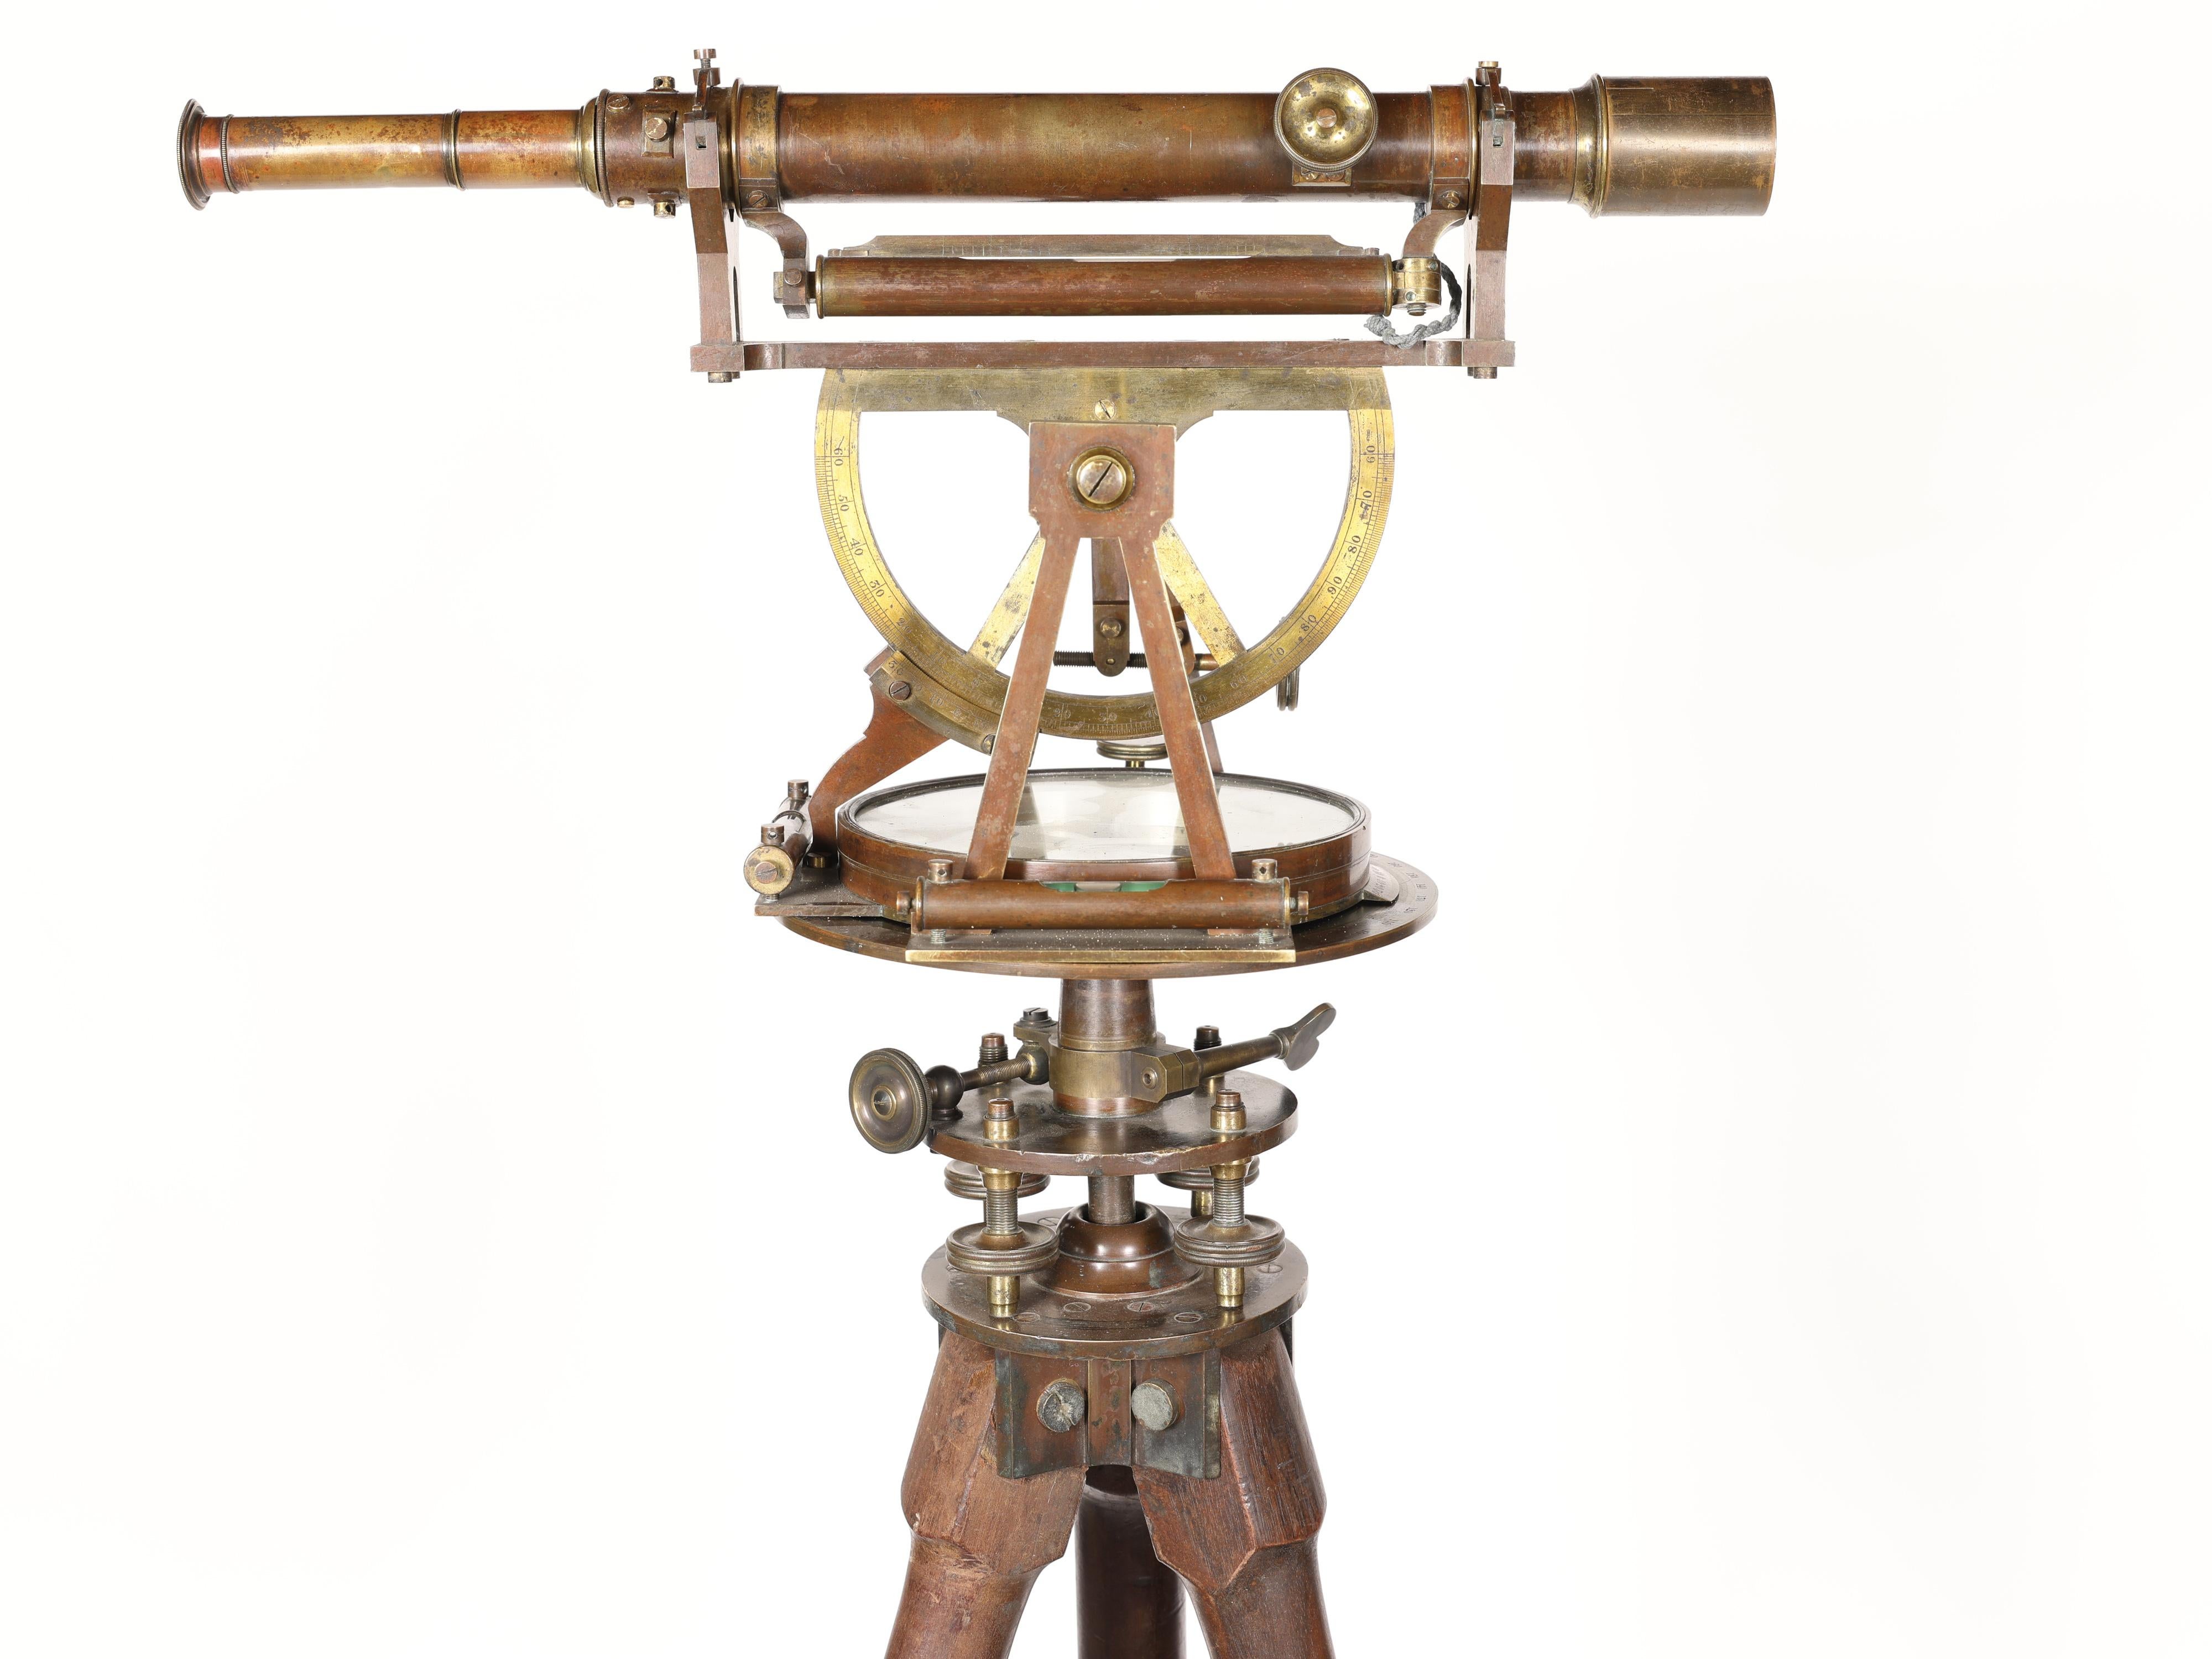 This is a Wonderful Pike & Sons Theodolite (166 Broadway) complete with Box & Tripod.  American made 19th century Theodolites are VERY common.  Finding one in great shape with its original box and tripod is nearly impossible.  And this one comes